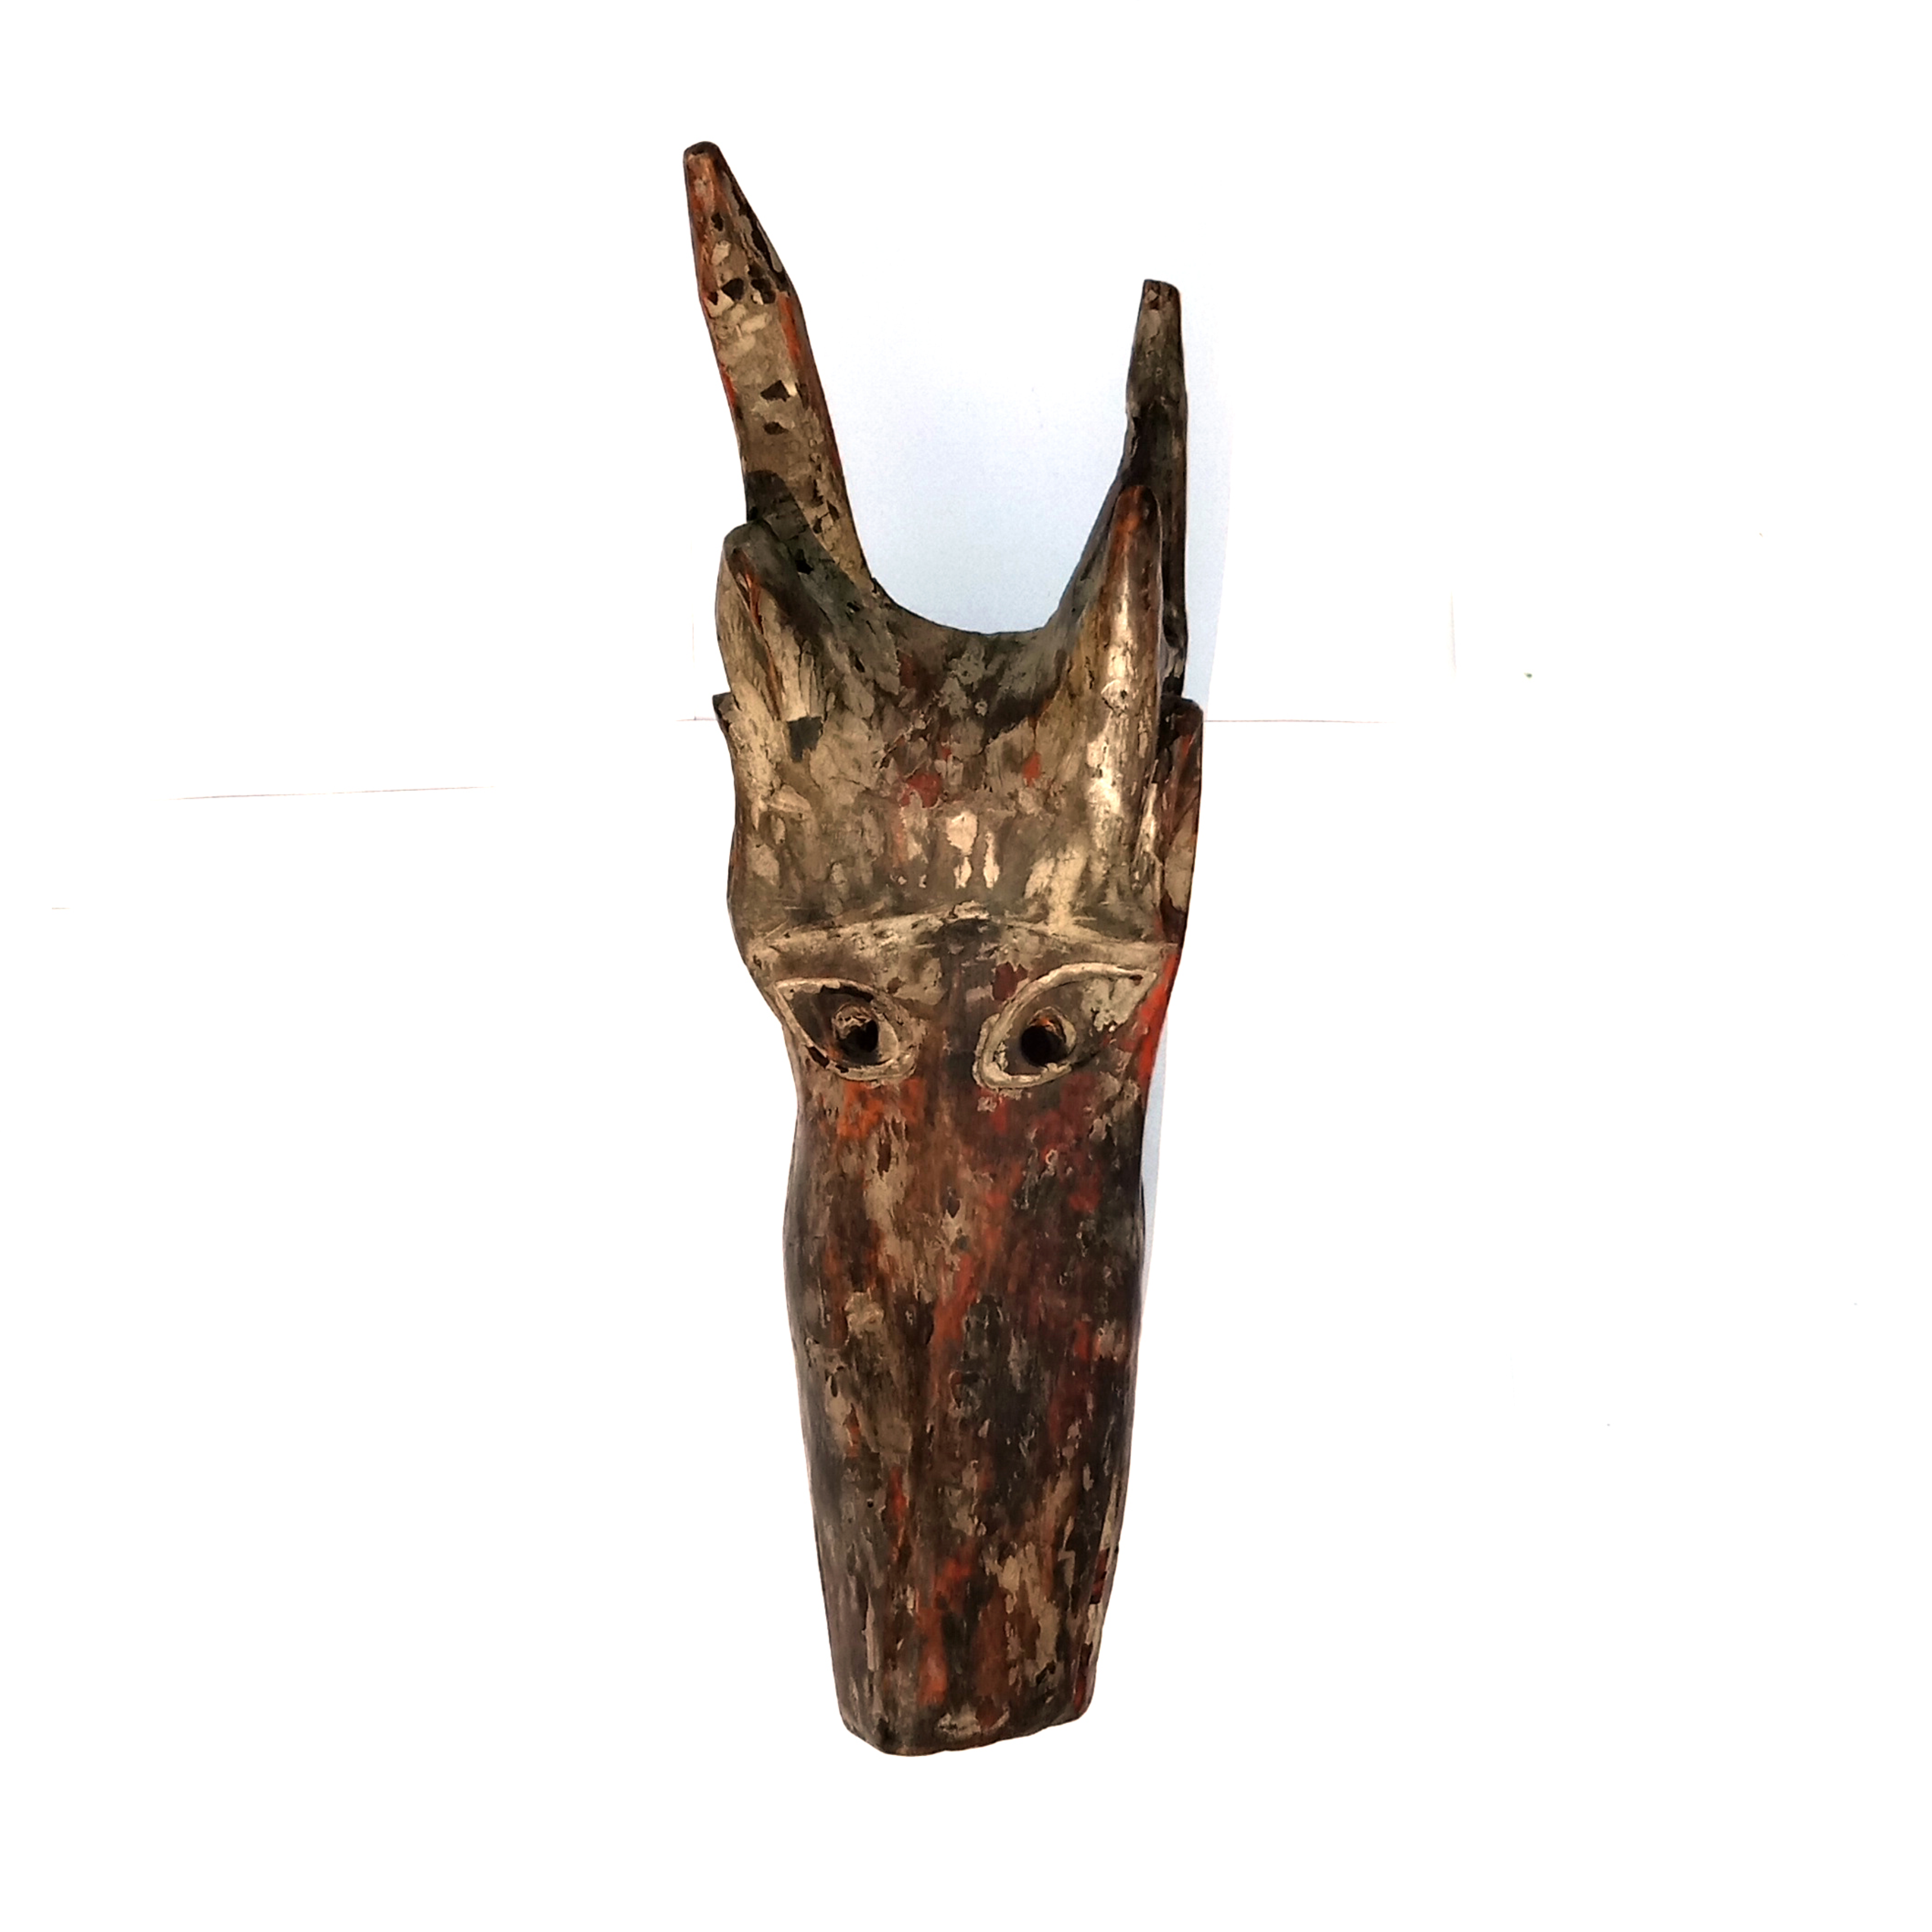 Handcrafted Art Craft Mask Cover Tribal Design Wood Drift Wood Unnamed Mask, wall decoration, mask decor